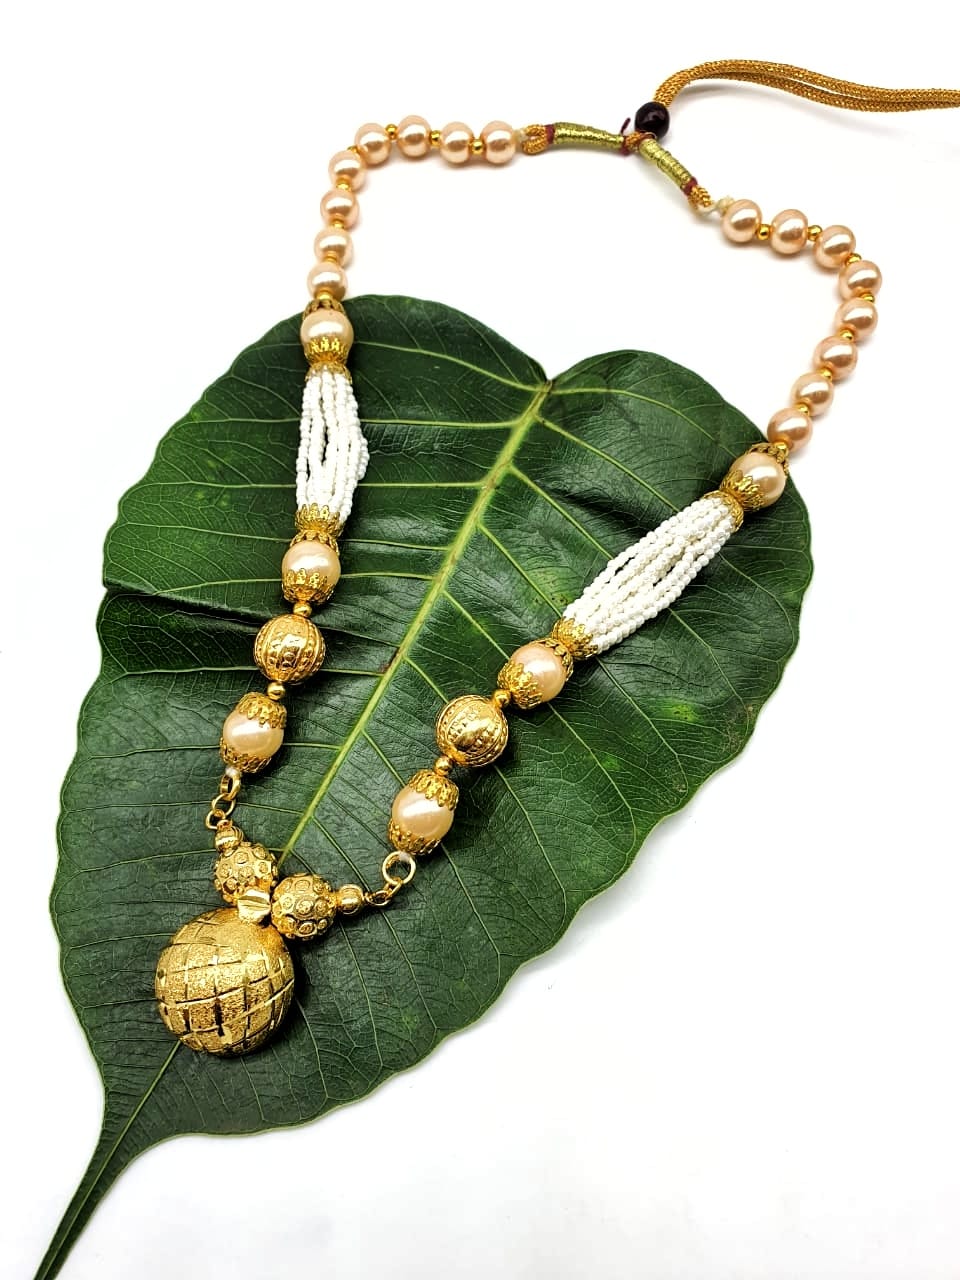 Digital Dress Room Gold Plated Necklace with Vati Pendant Big Golden Bead Mala Necklace